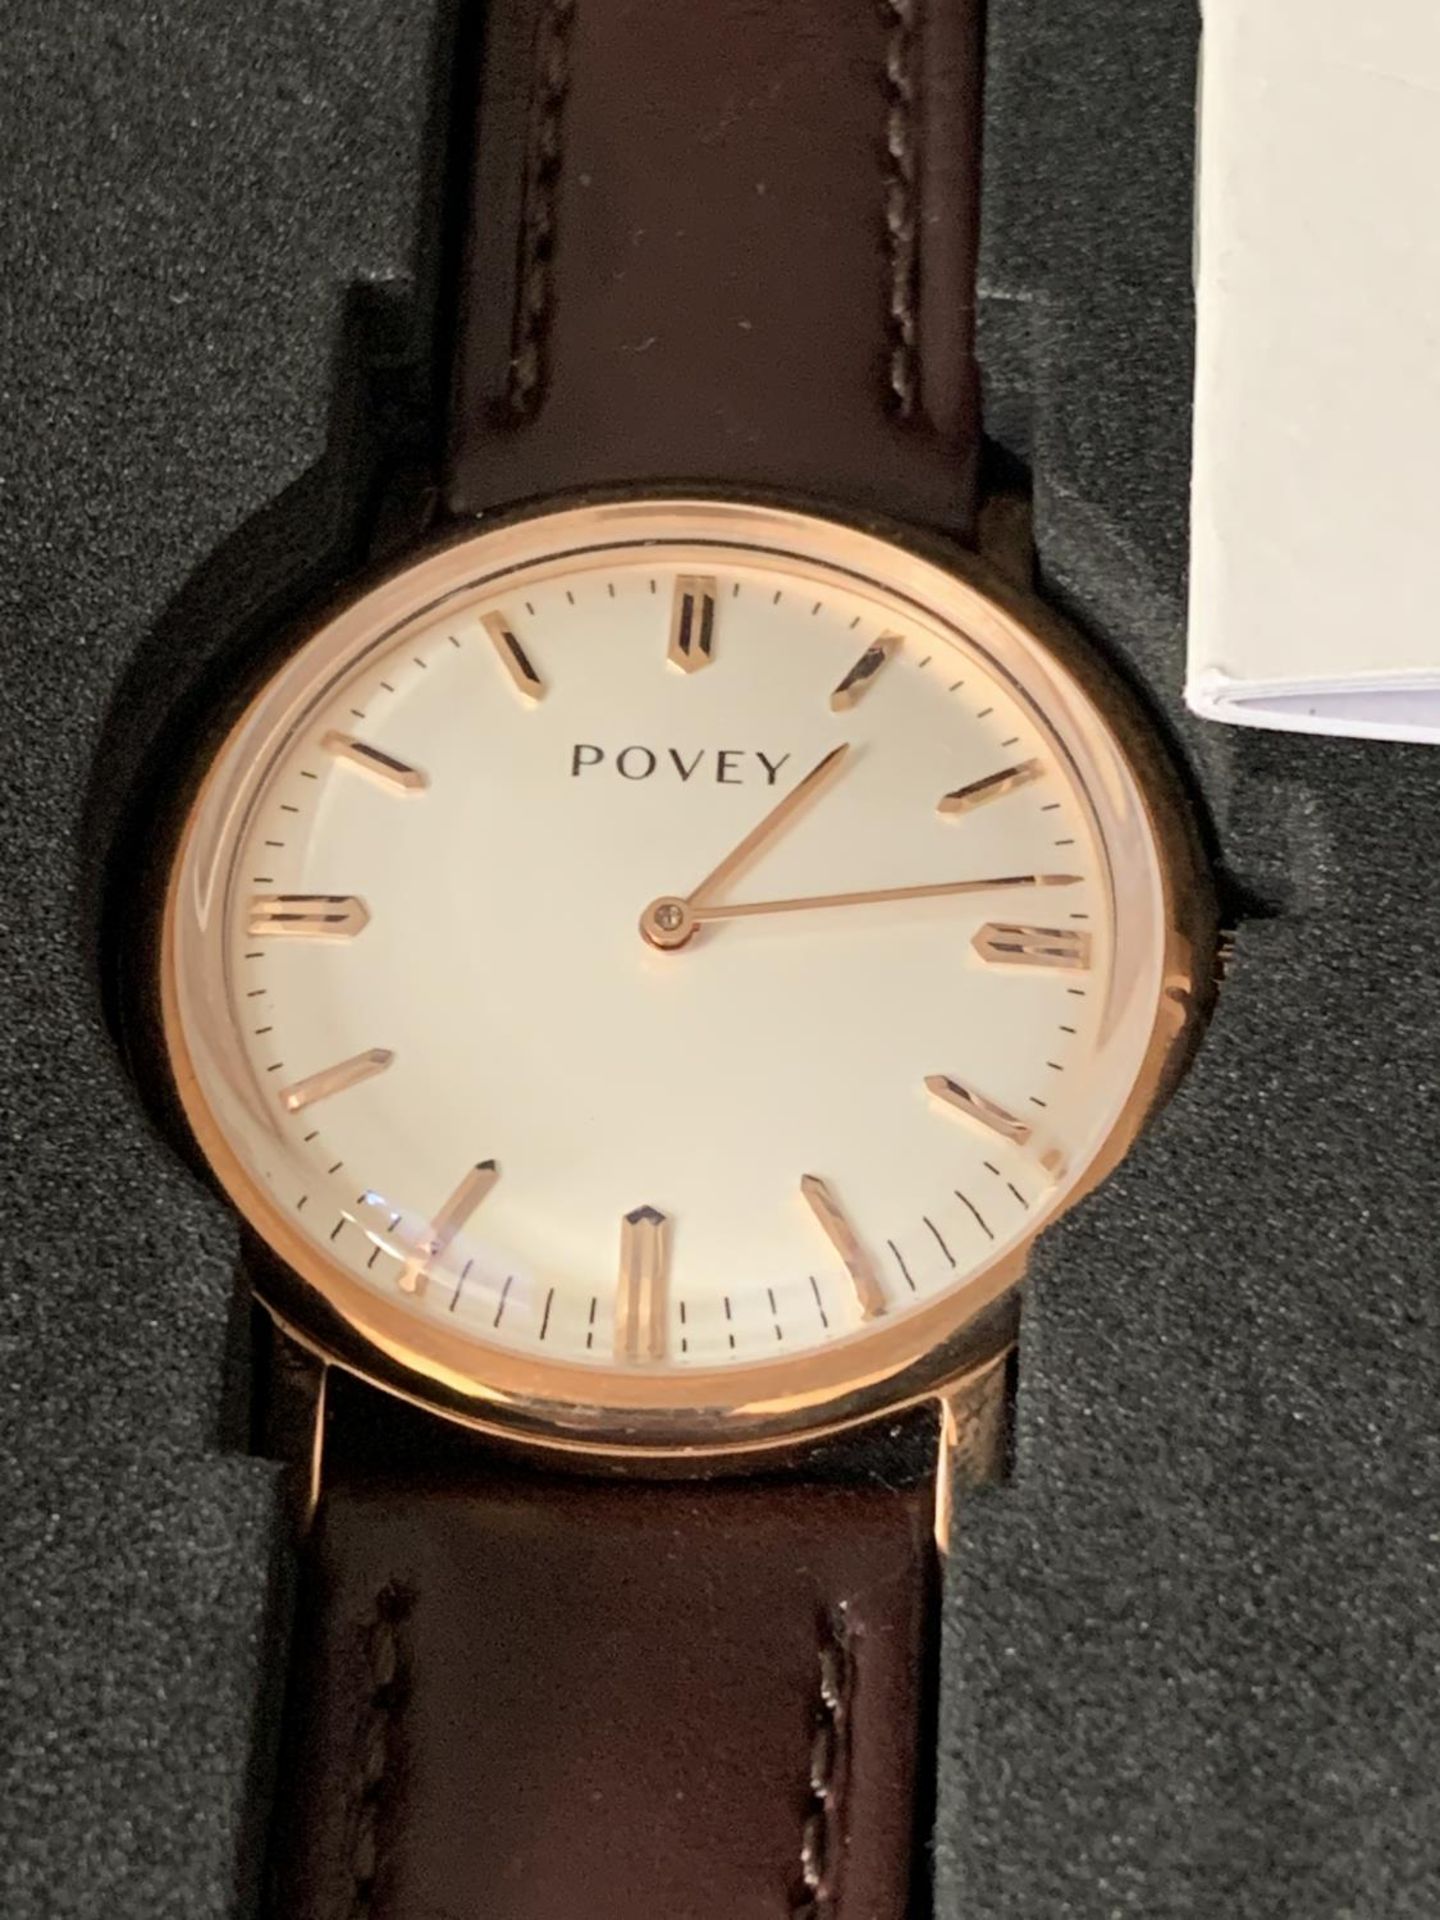 AN AS NEW AND BOXED POVEY WRIST WATCH SEEN WORKING BUT NO WARRANTY - Image 2 of 2